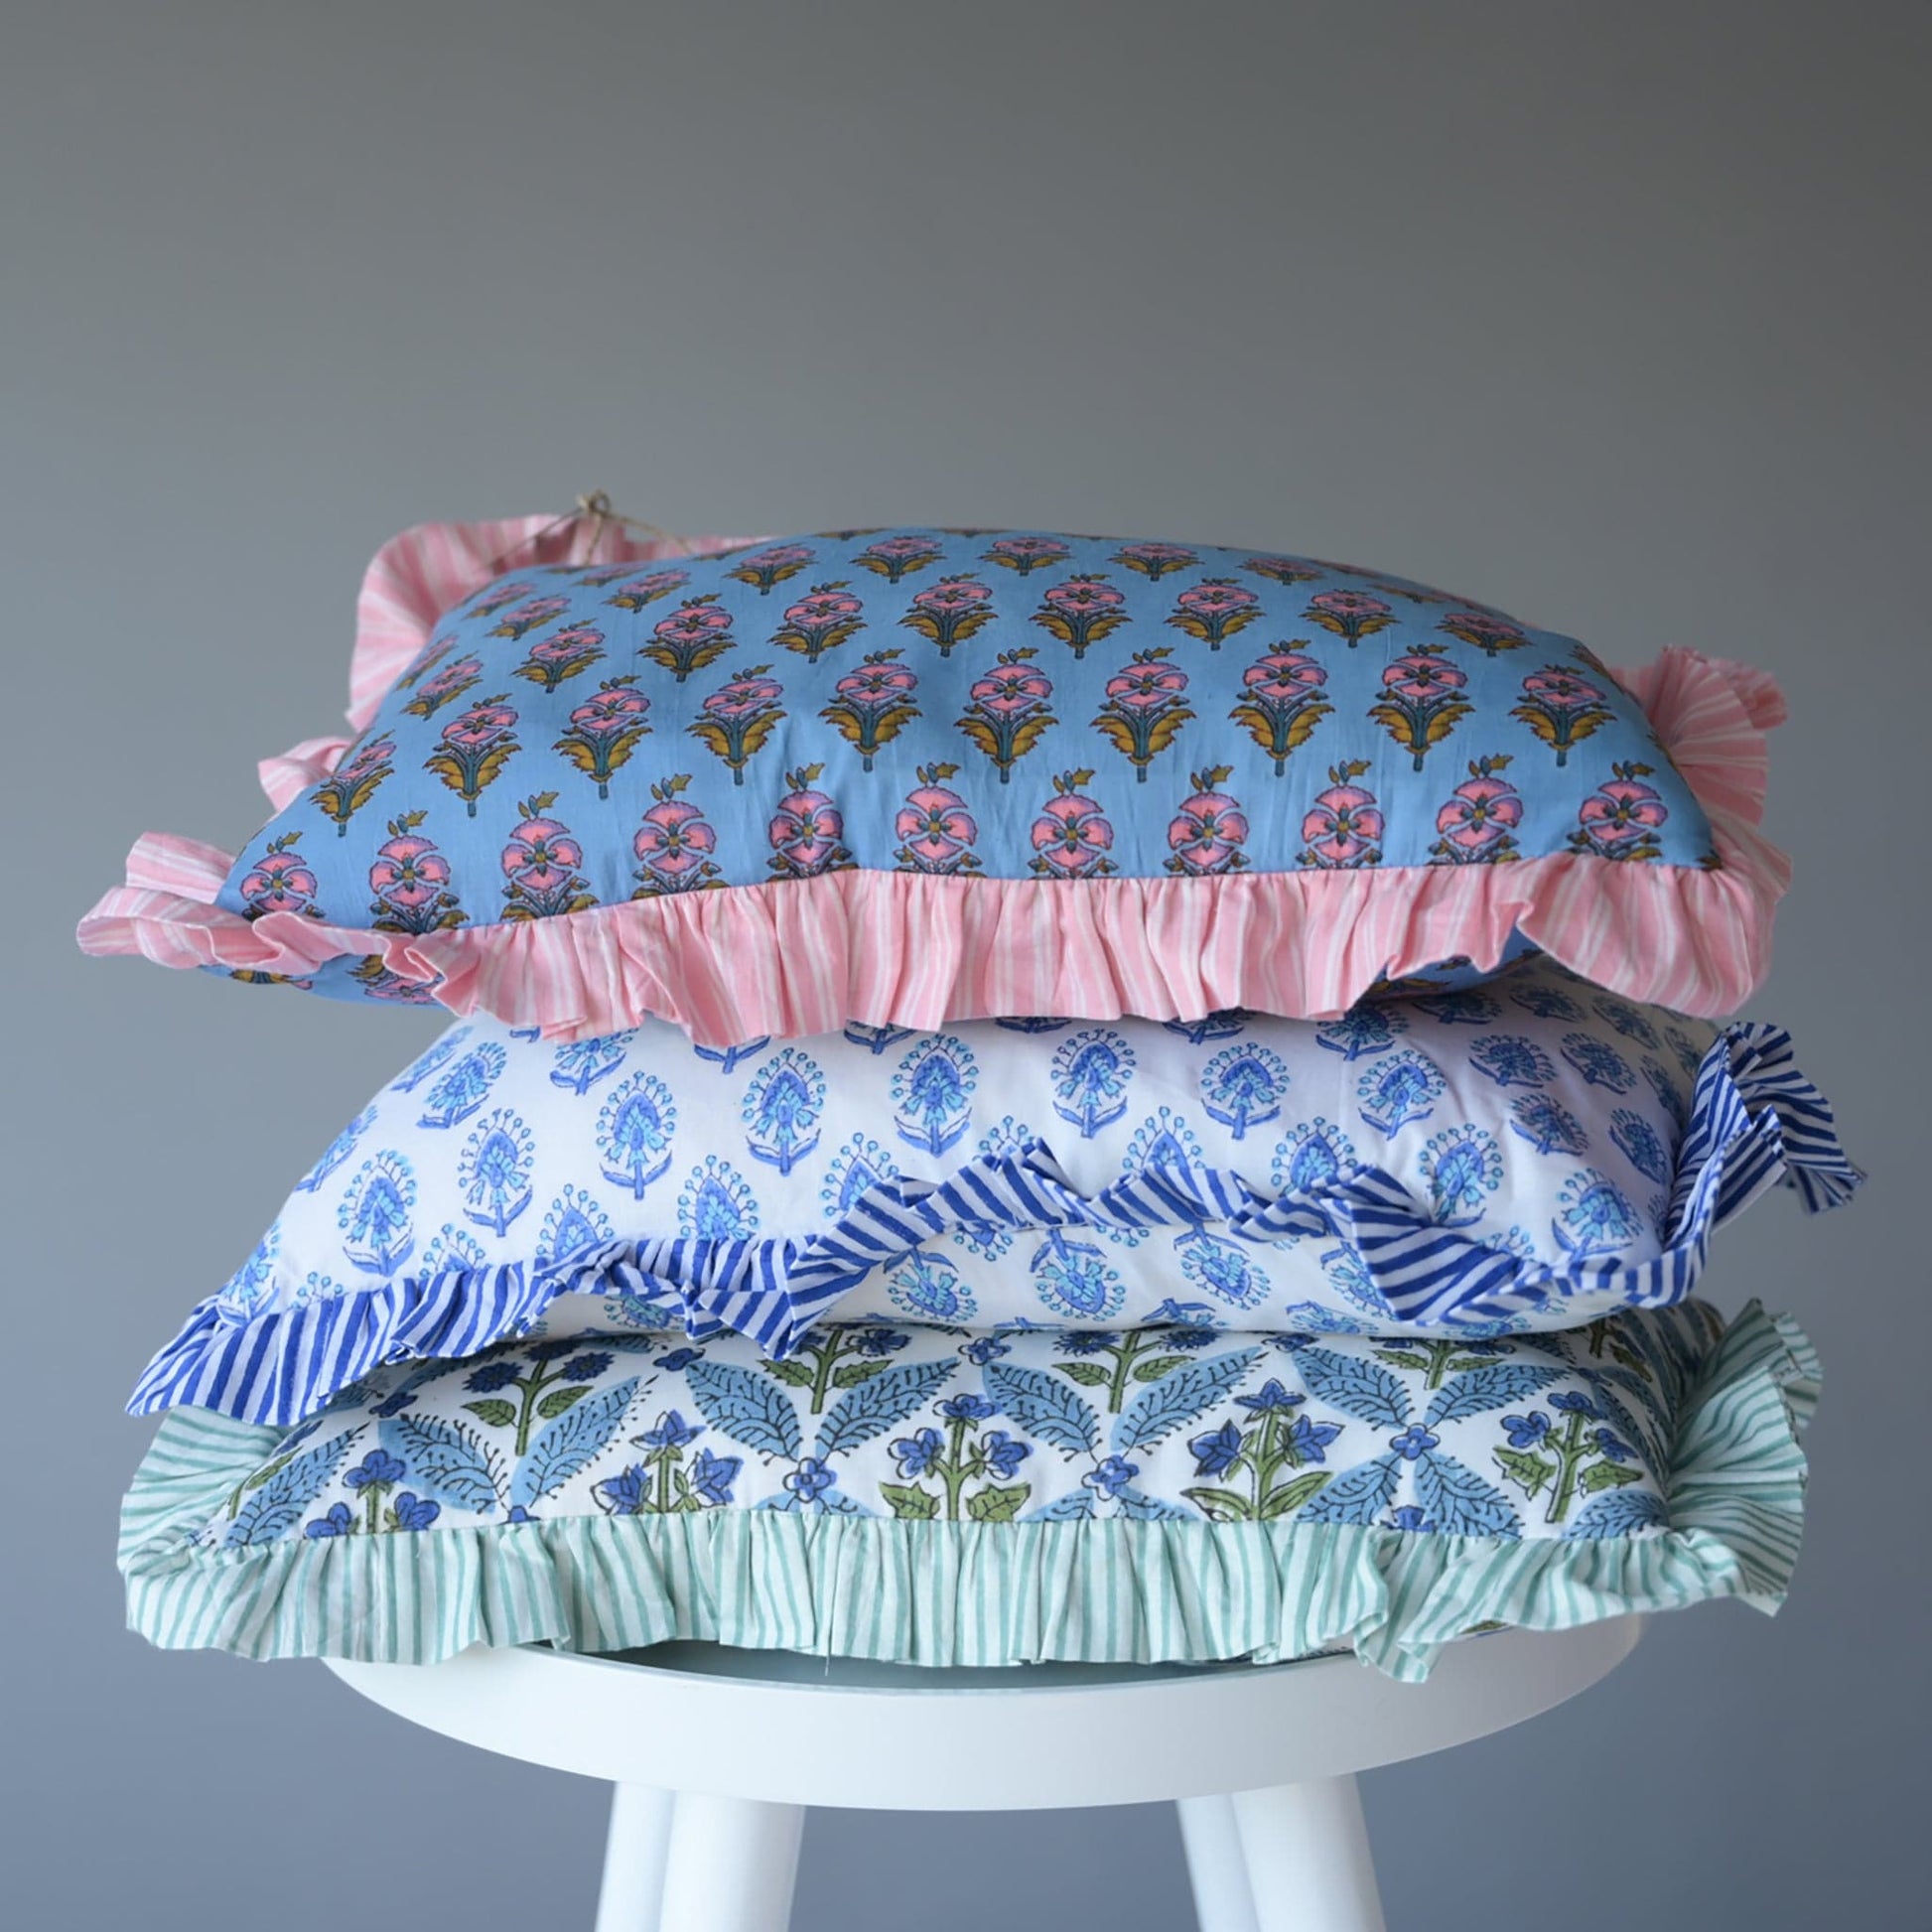 Cushions Small Ruffle Cushion - Small Pink Flowers on Blue 19130